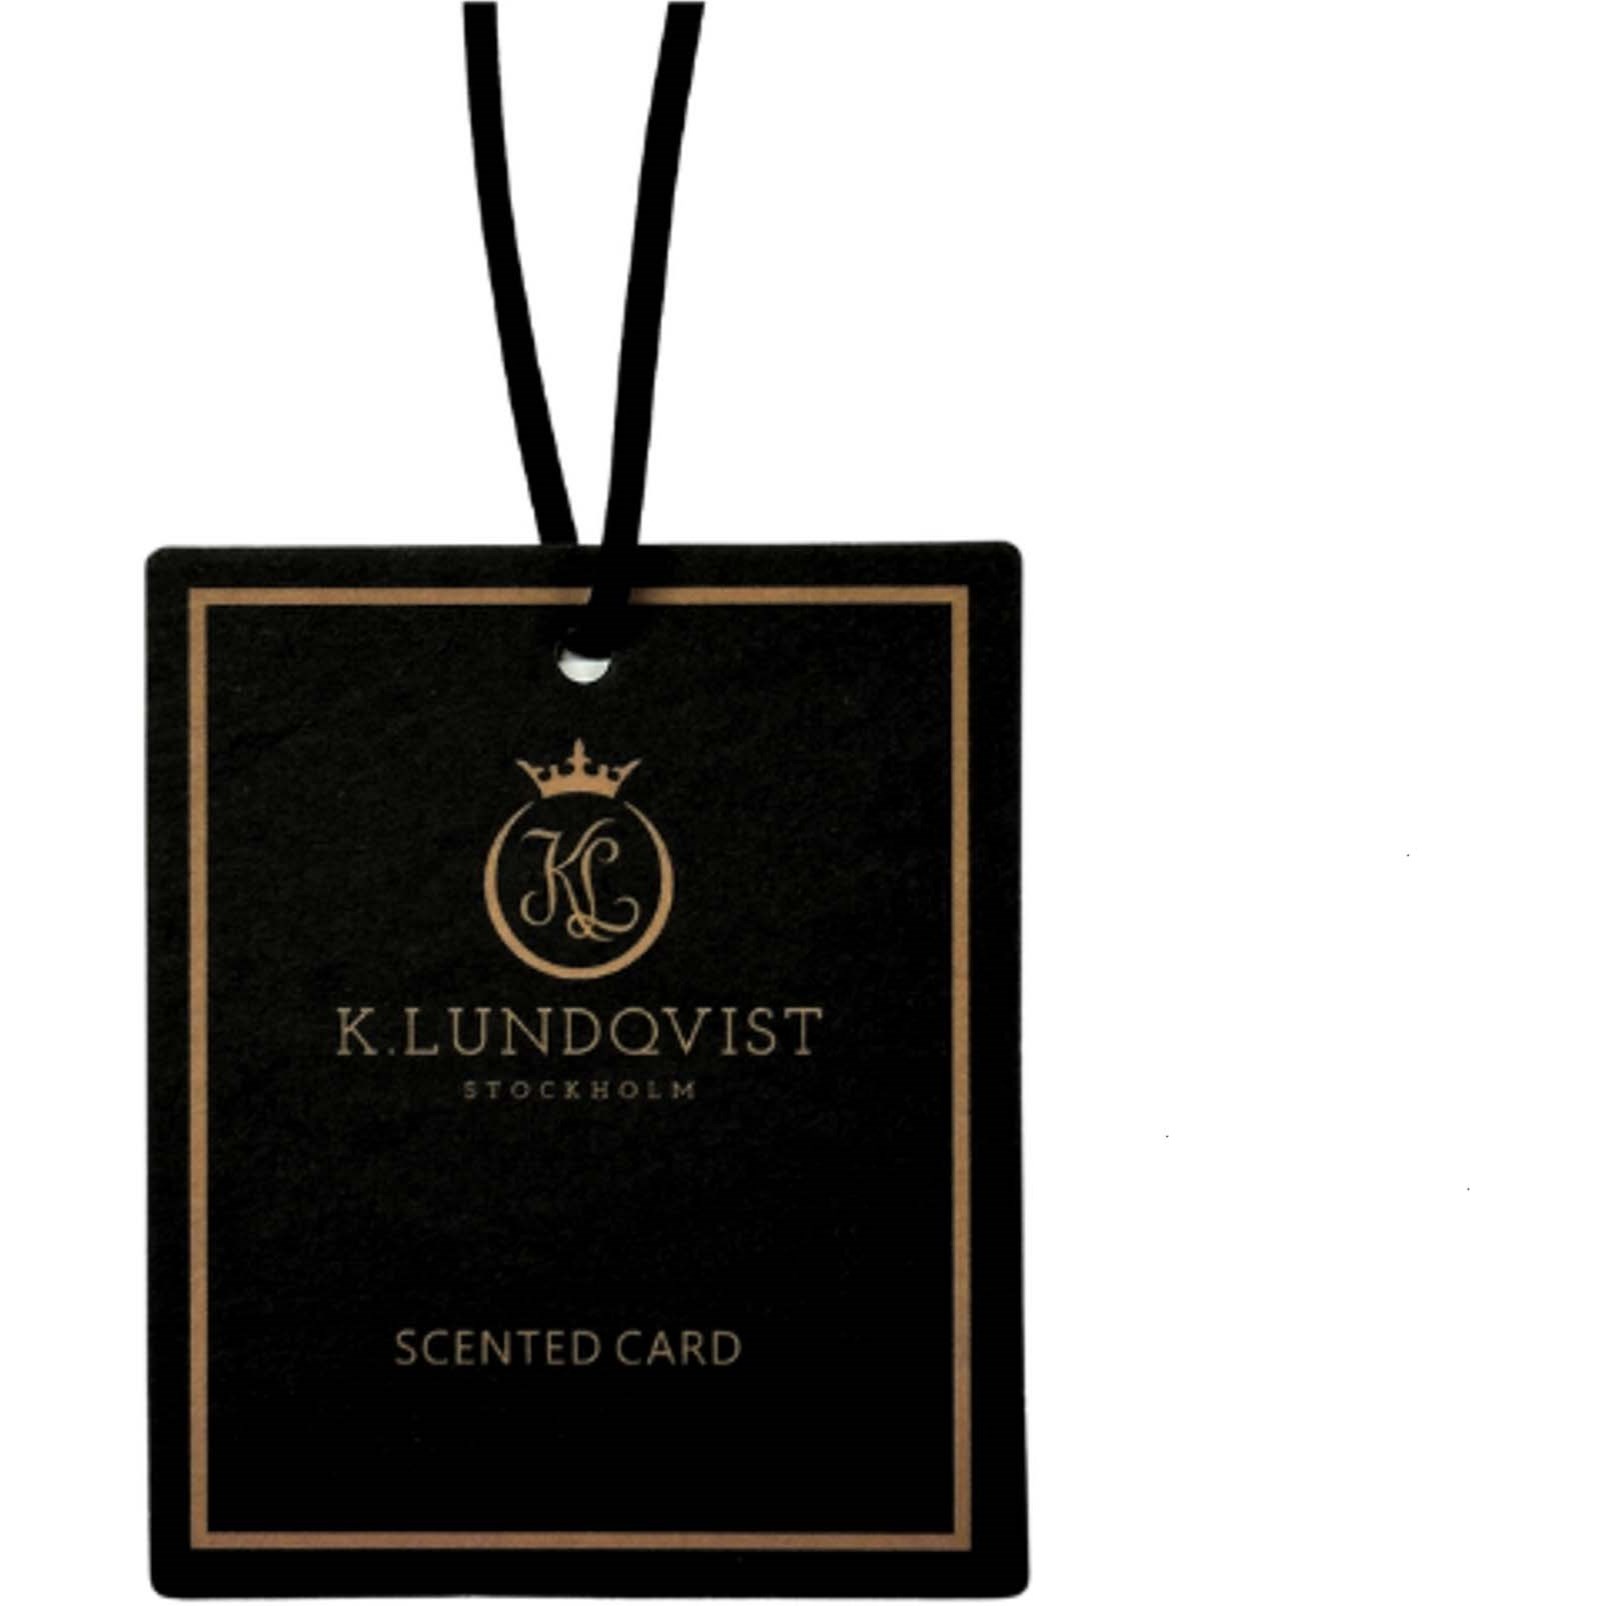 K. Lundqvist Stockholm Scented Card Oud/Musk & Oud